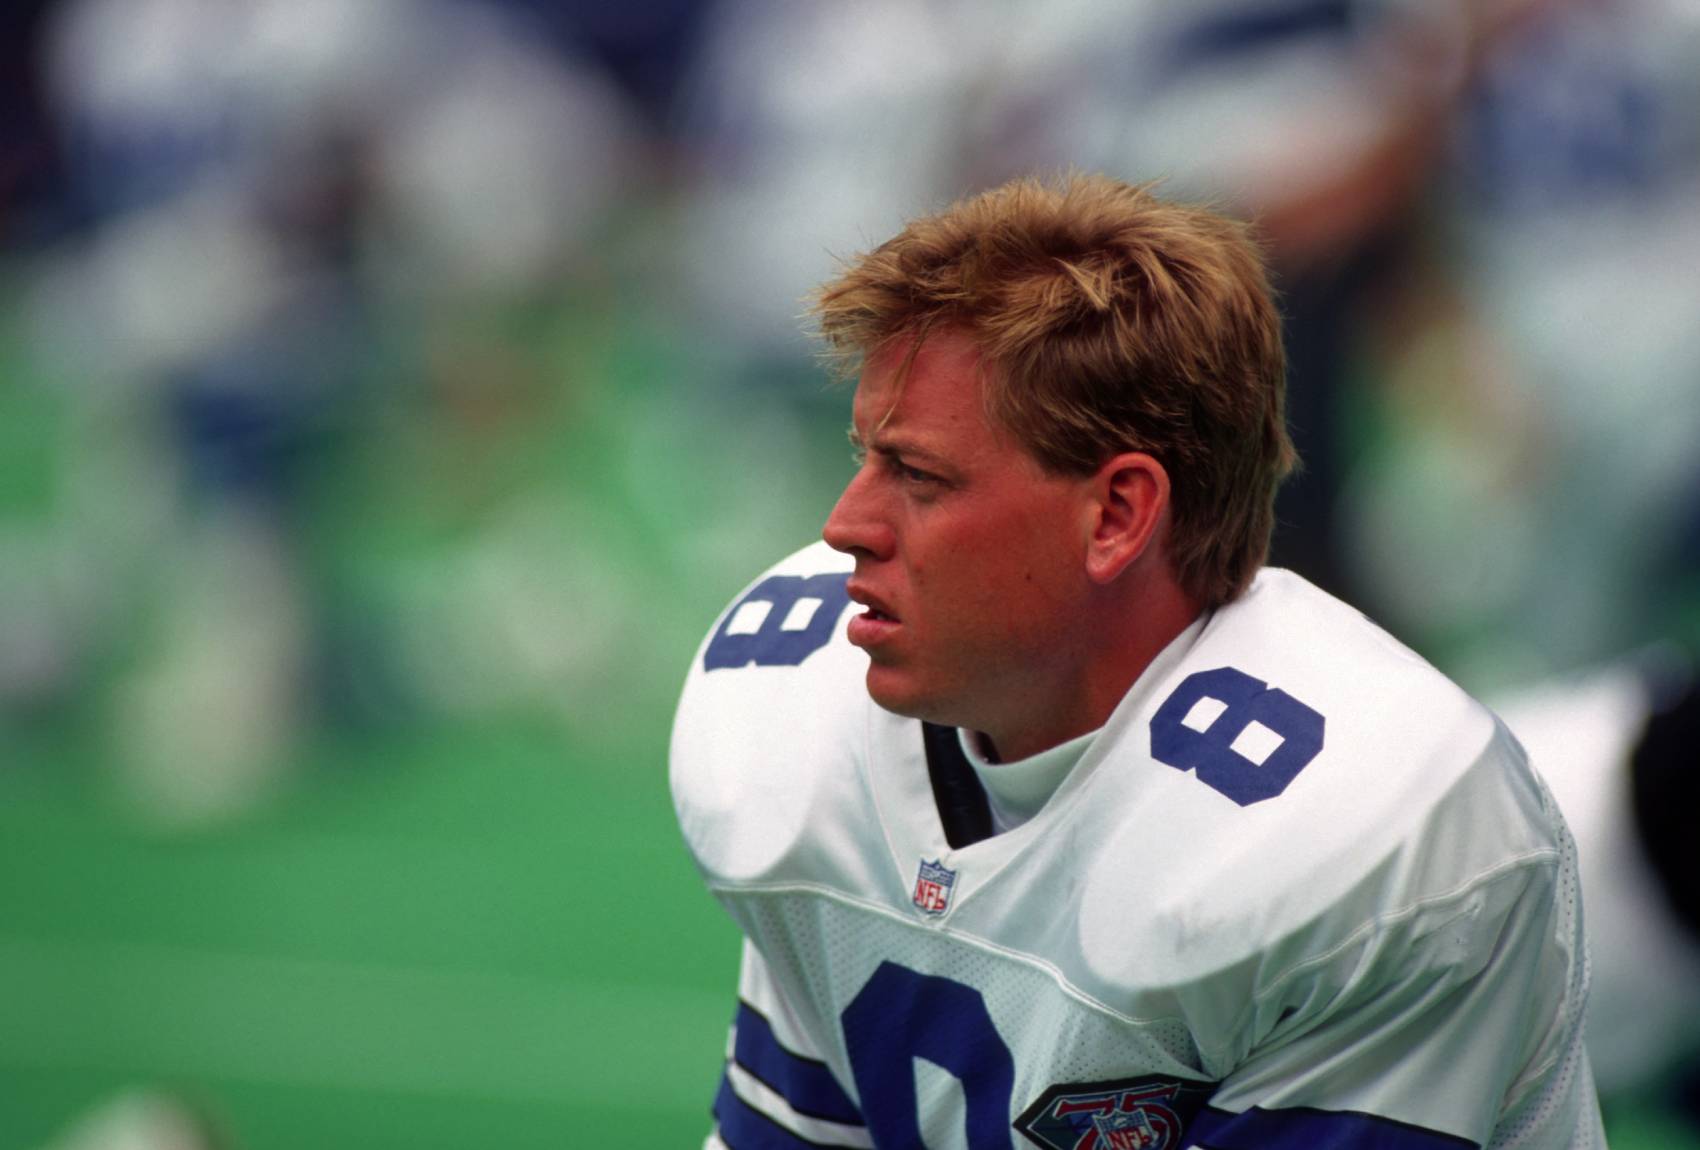 Cowboys legend Troy Aikman eerily predicted his future concussion problems in a 1994 commercial.